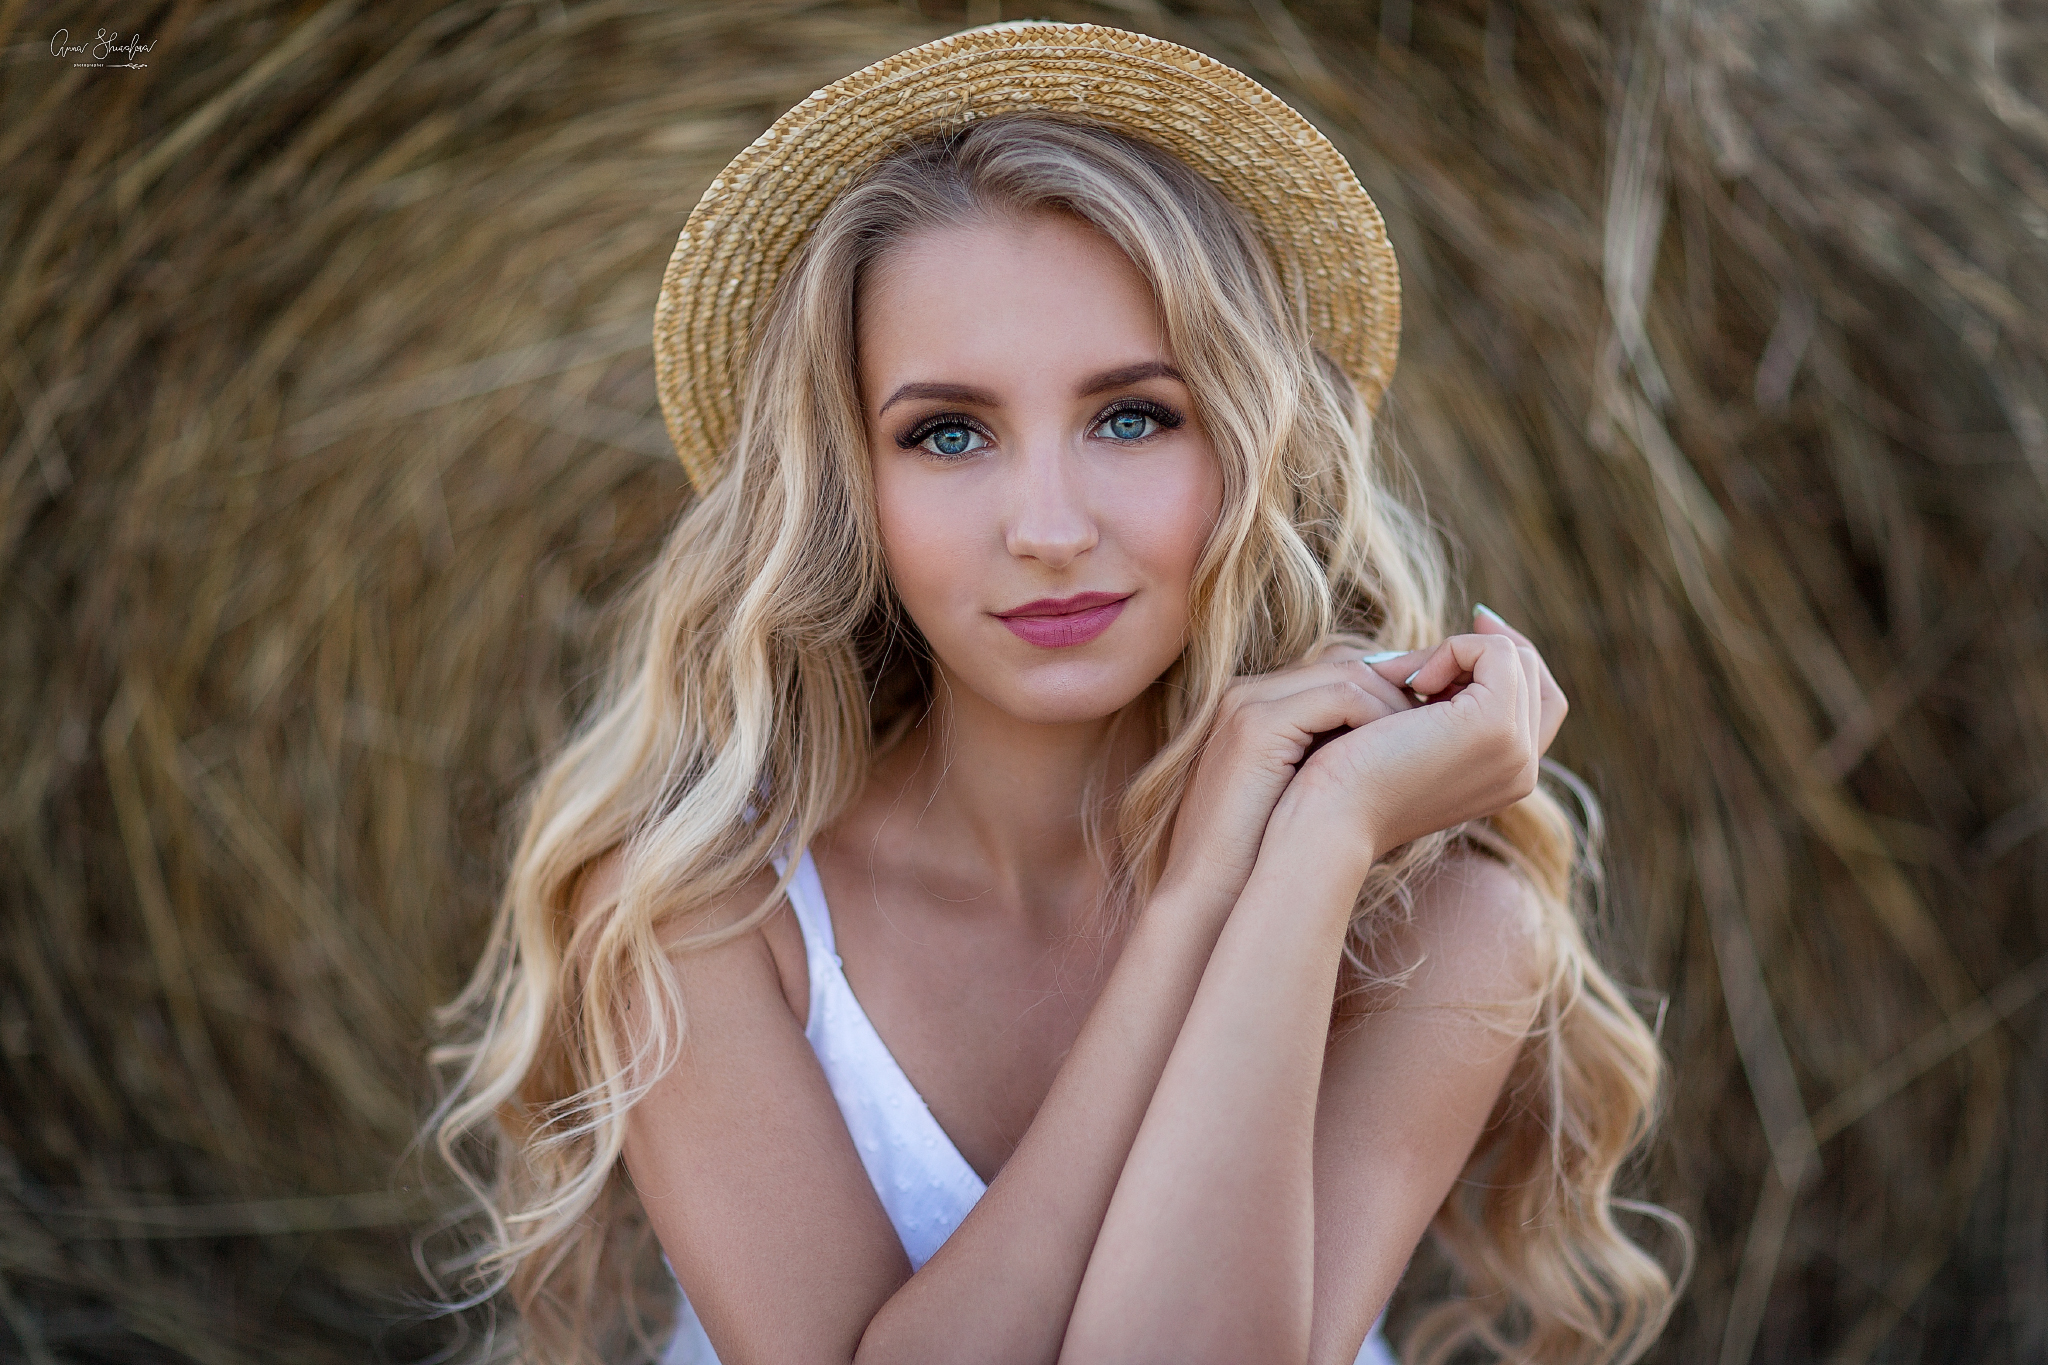 Women Model Blonde Women With Hats Hat Straw Hat Long Hair Looking At Viewer Blue Eyes Smiling Face  2048x1365